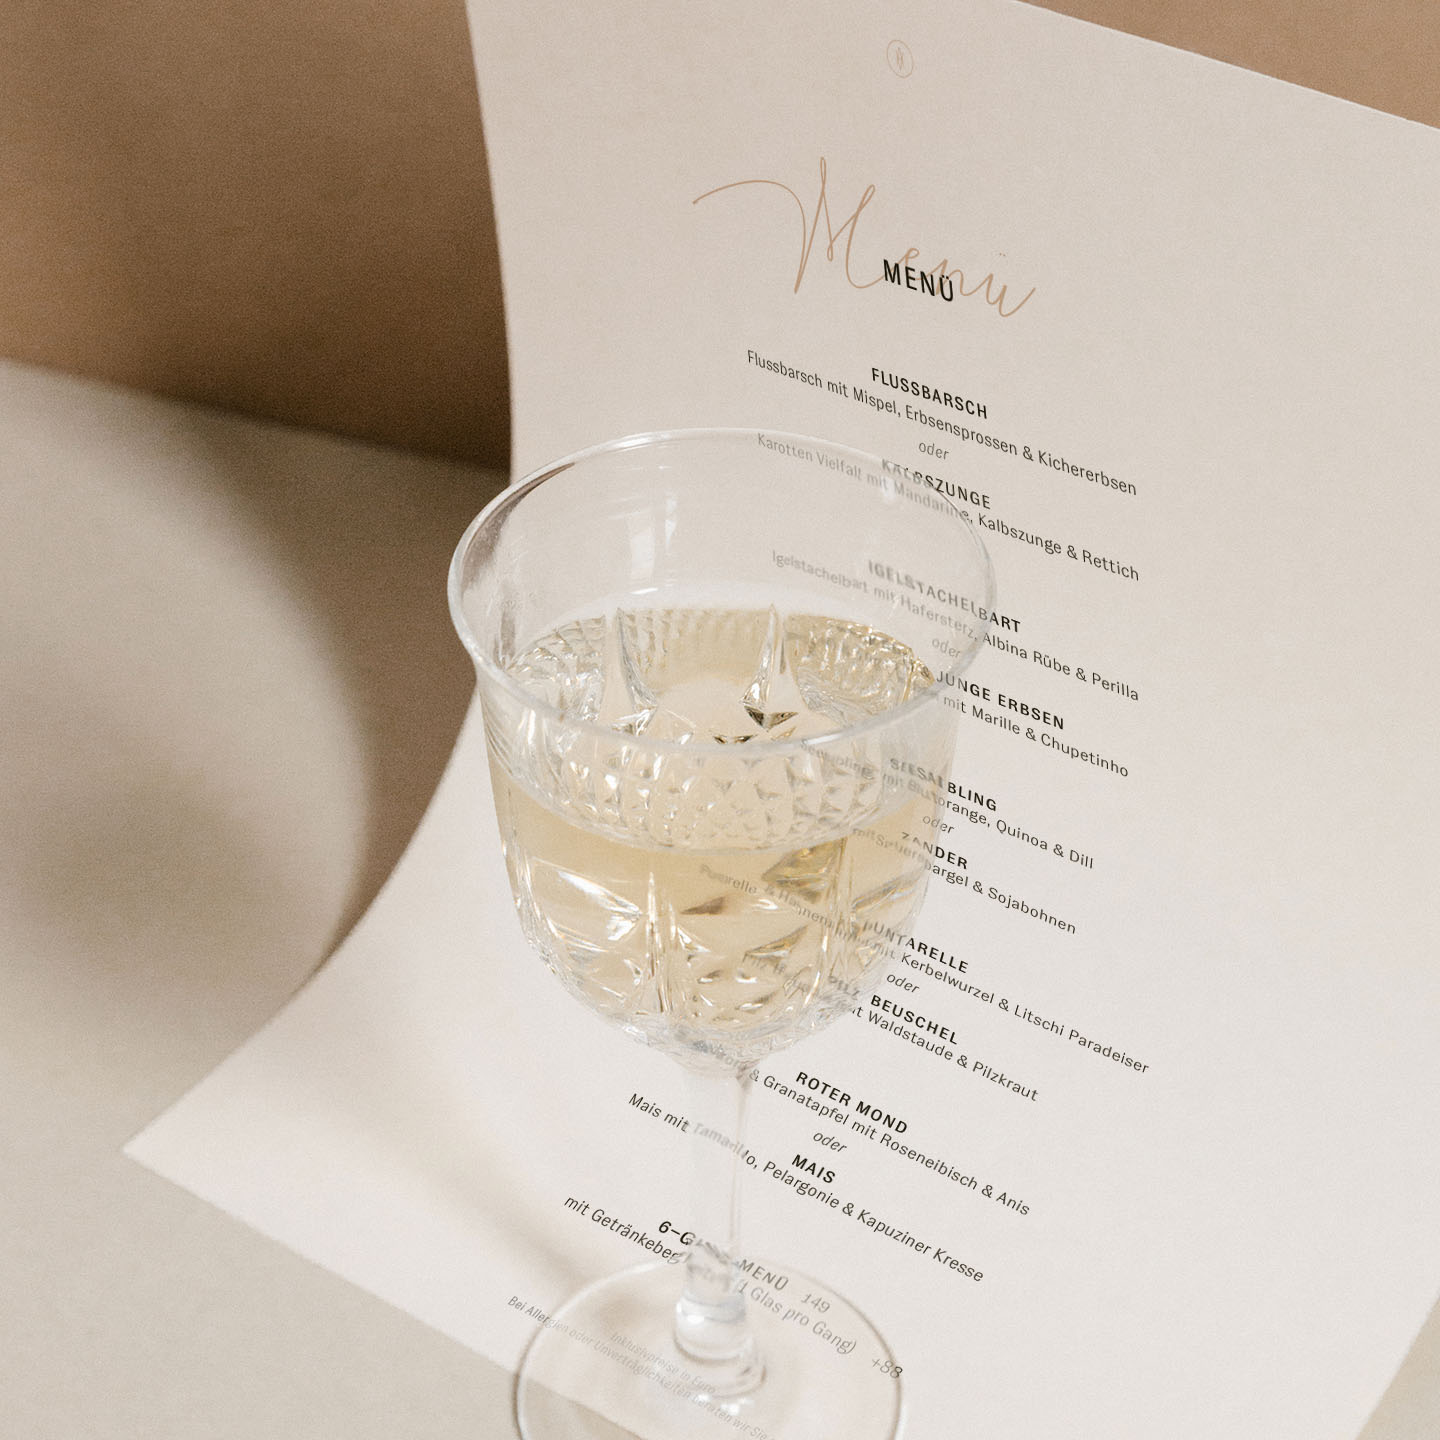 bright photography of a wine glass on top of the daily menu